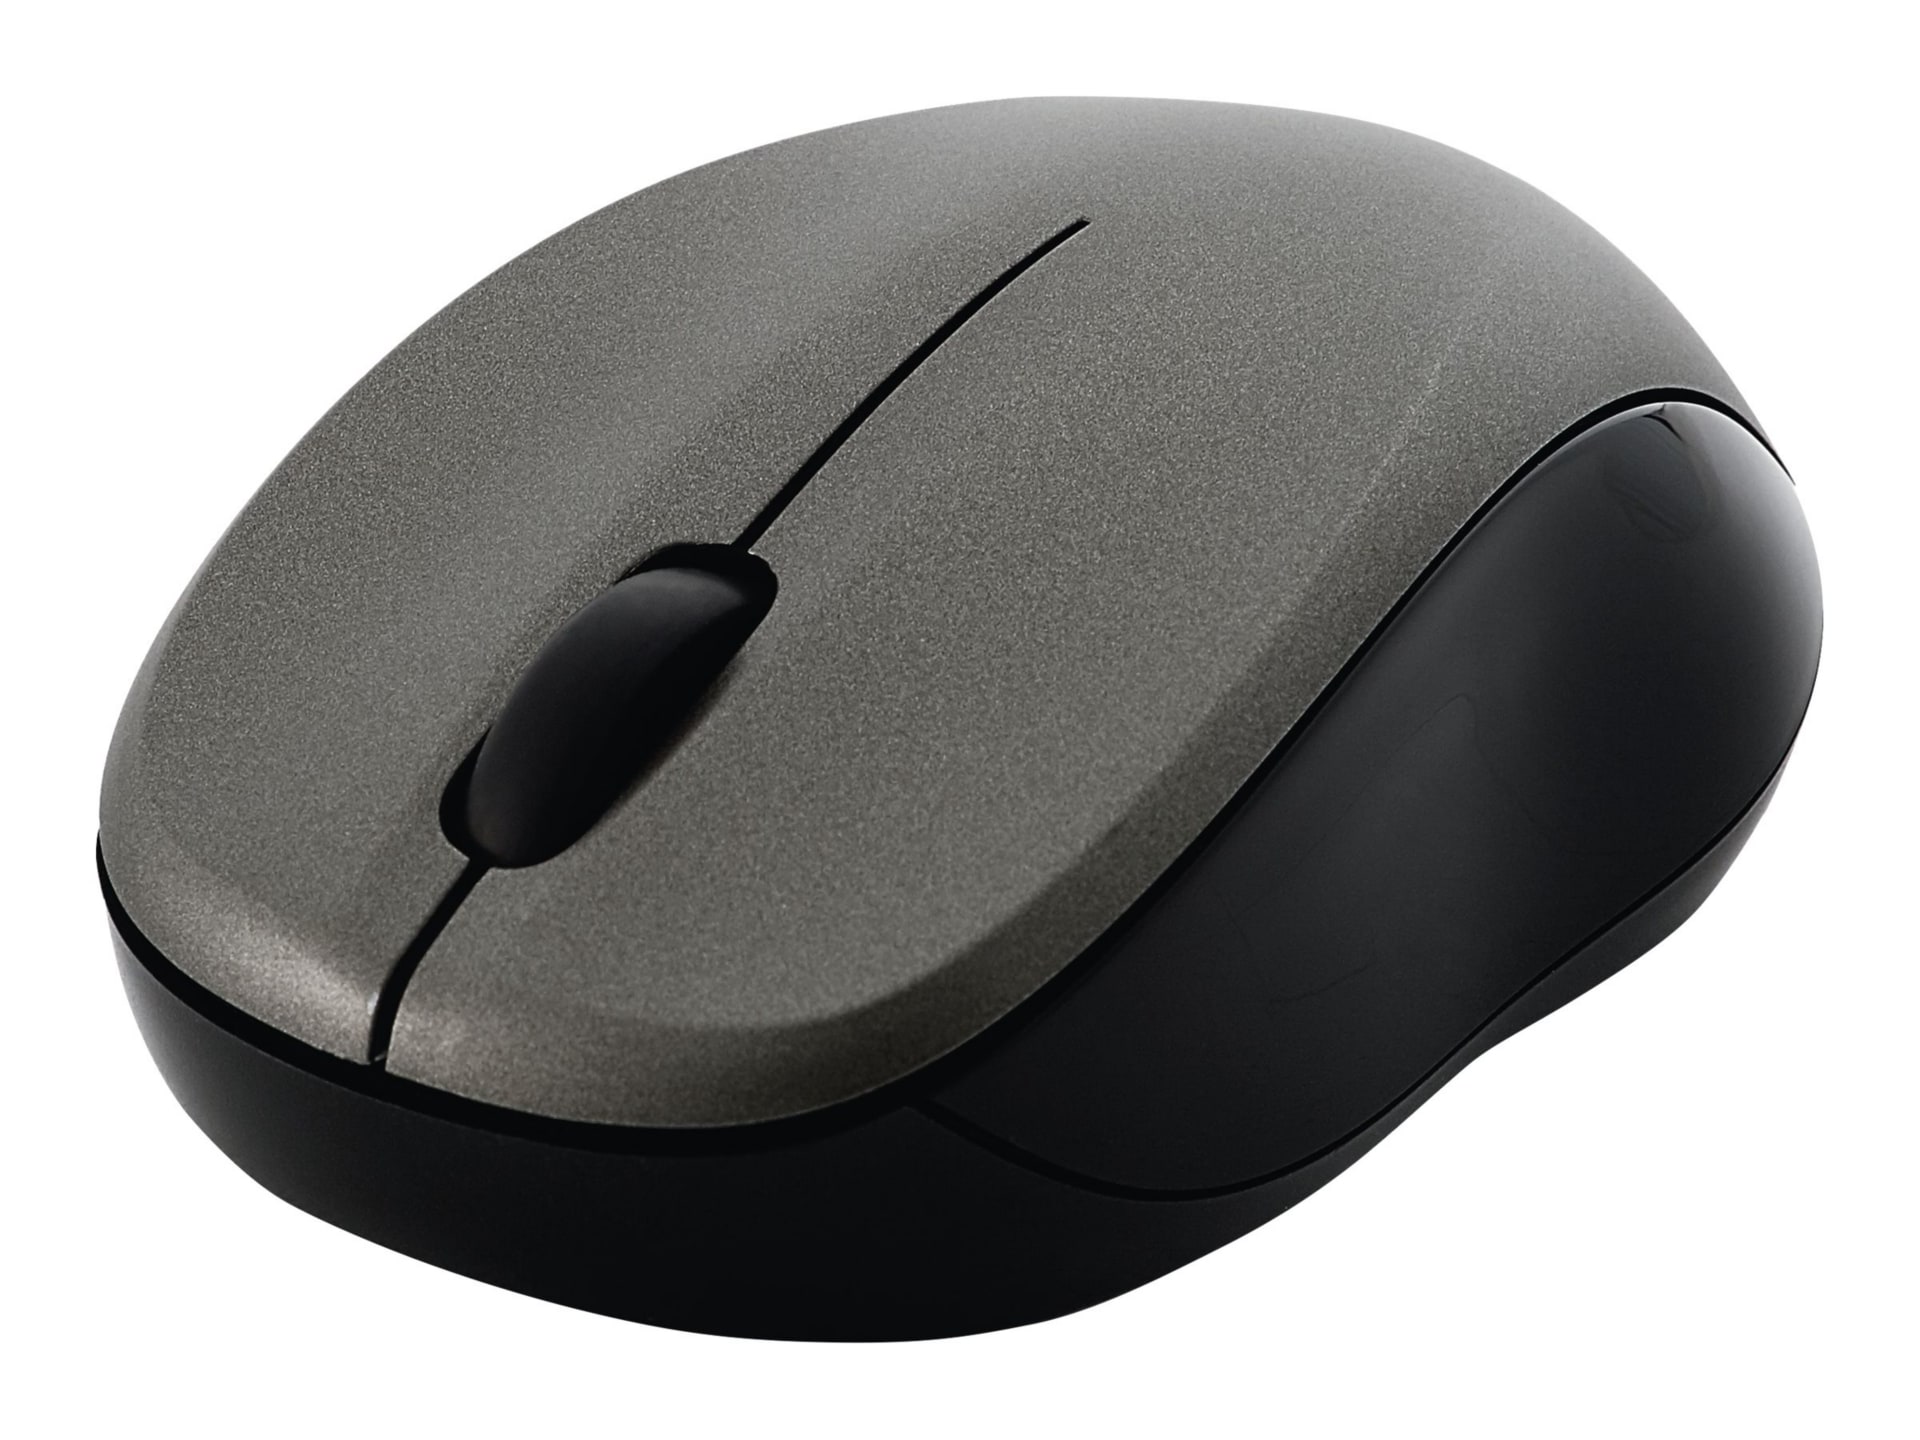 Verbatim Silent Wireless Blue LED Mouse - mouse - 2.4 GHz - graphite